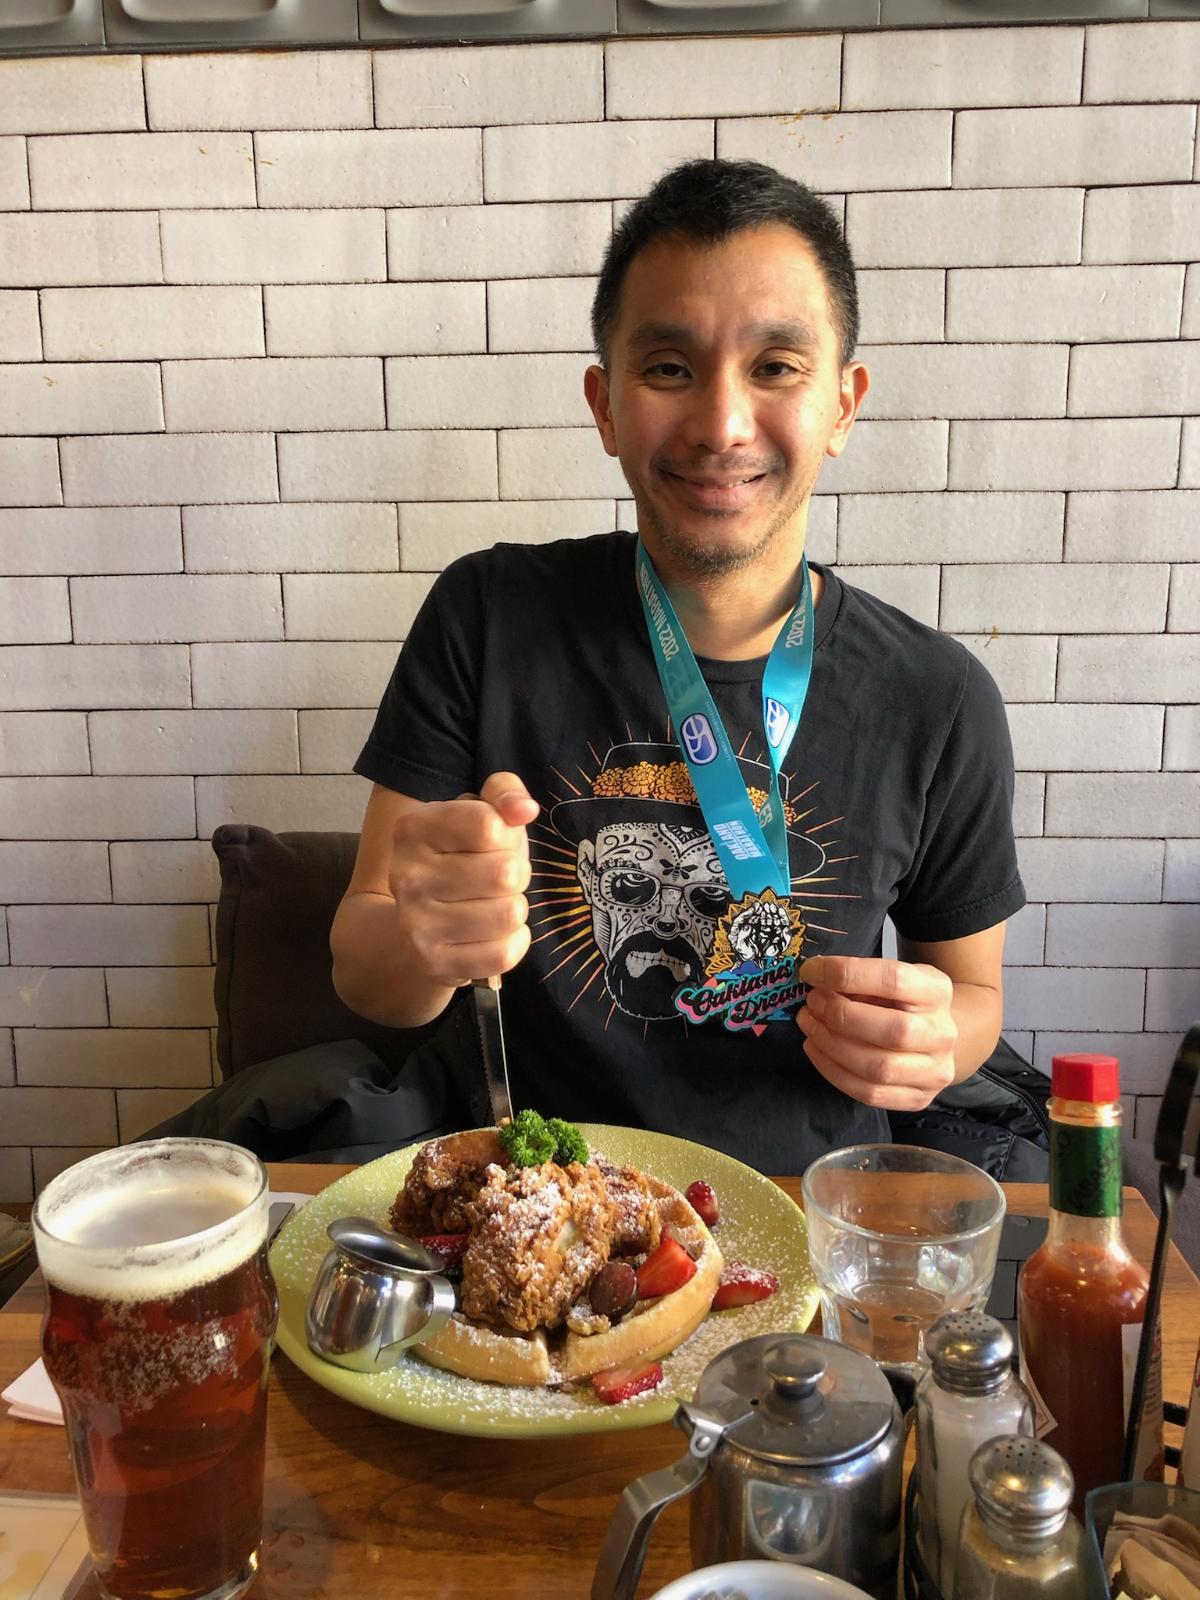 Fred enjoys a plate of chicken and waffles after completing the Oakland Marathon in California earlier this year.